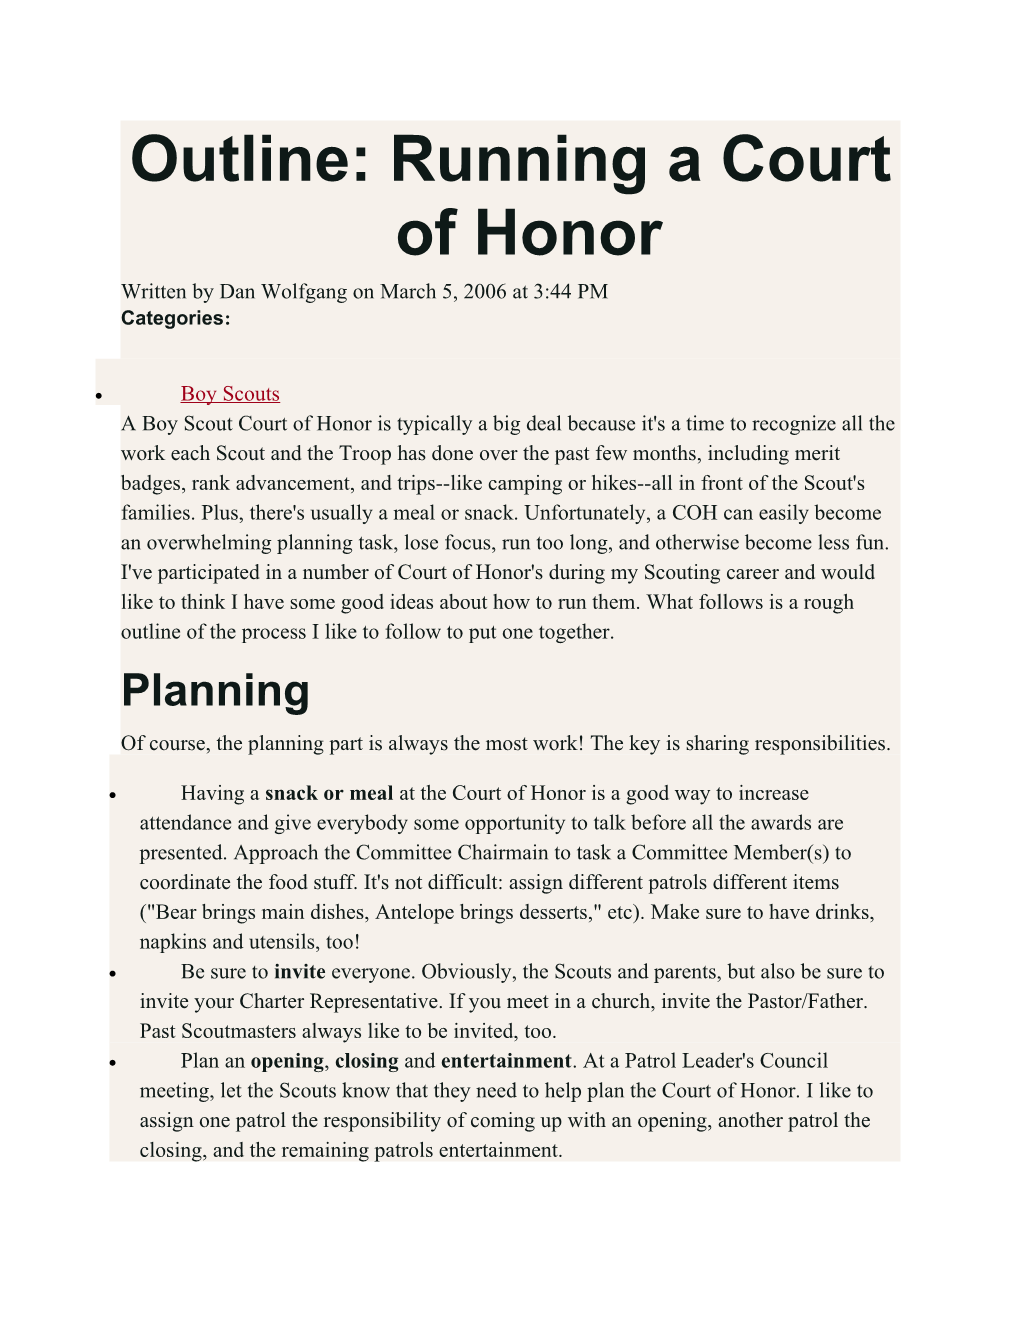 Outline: Running a Court of Honor